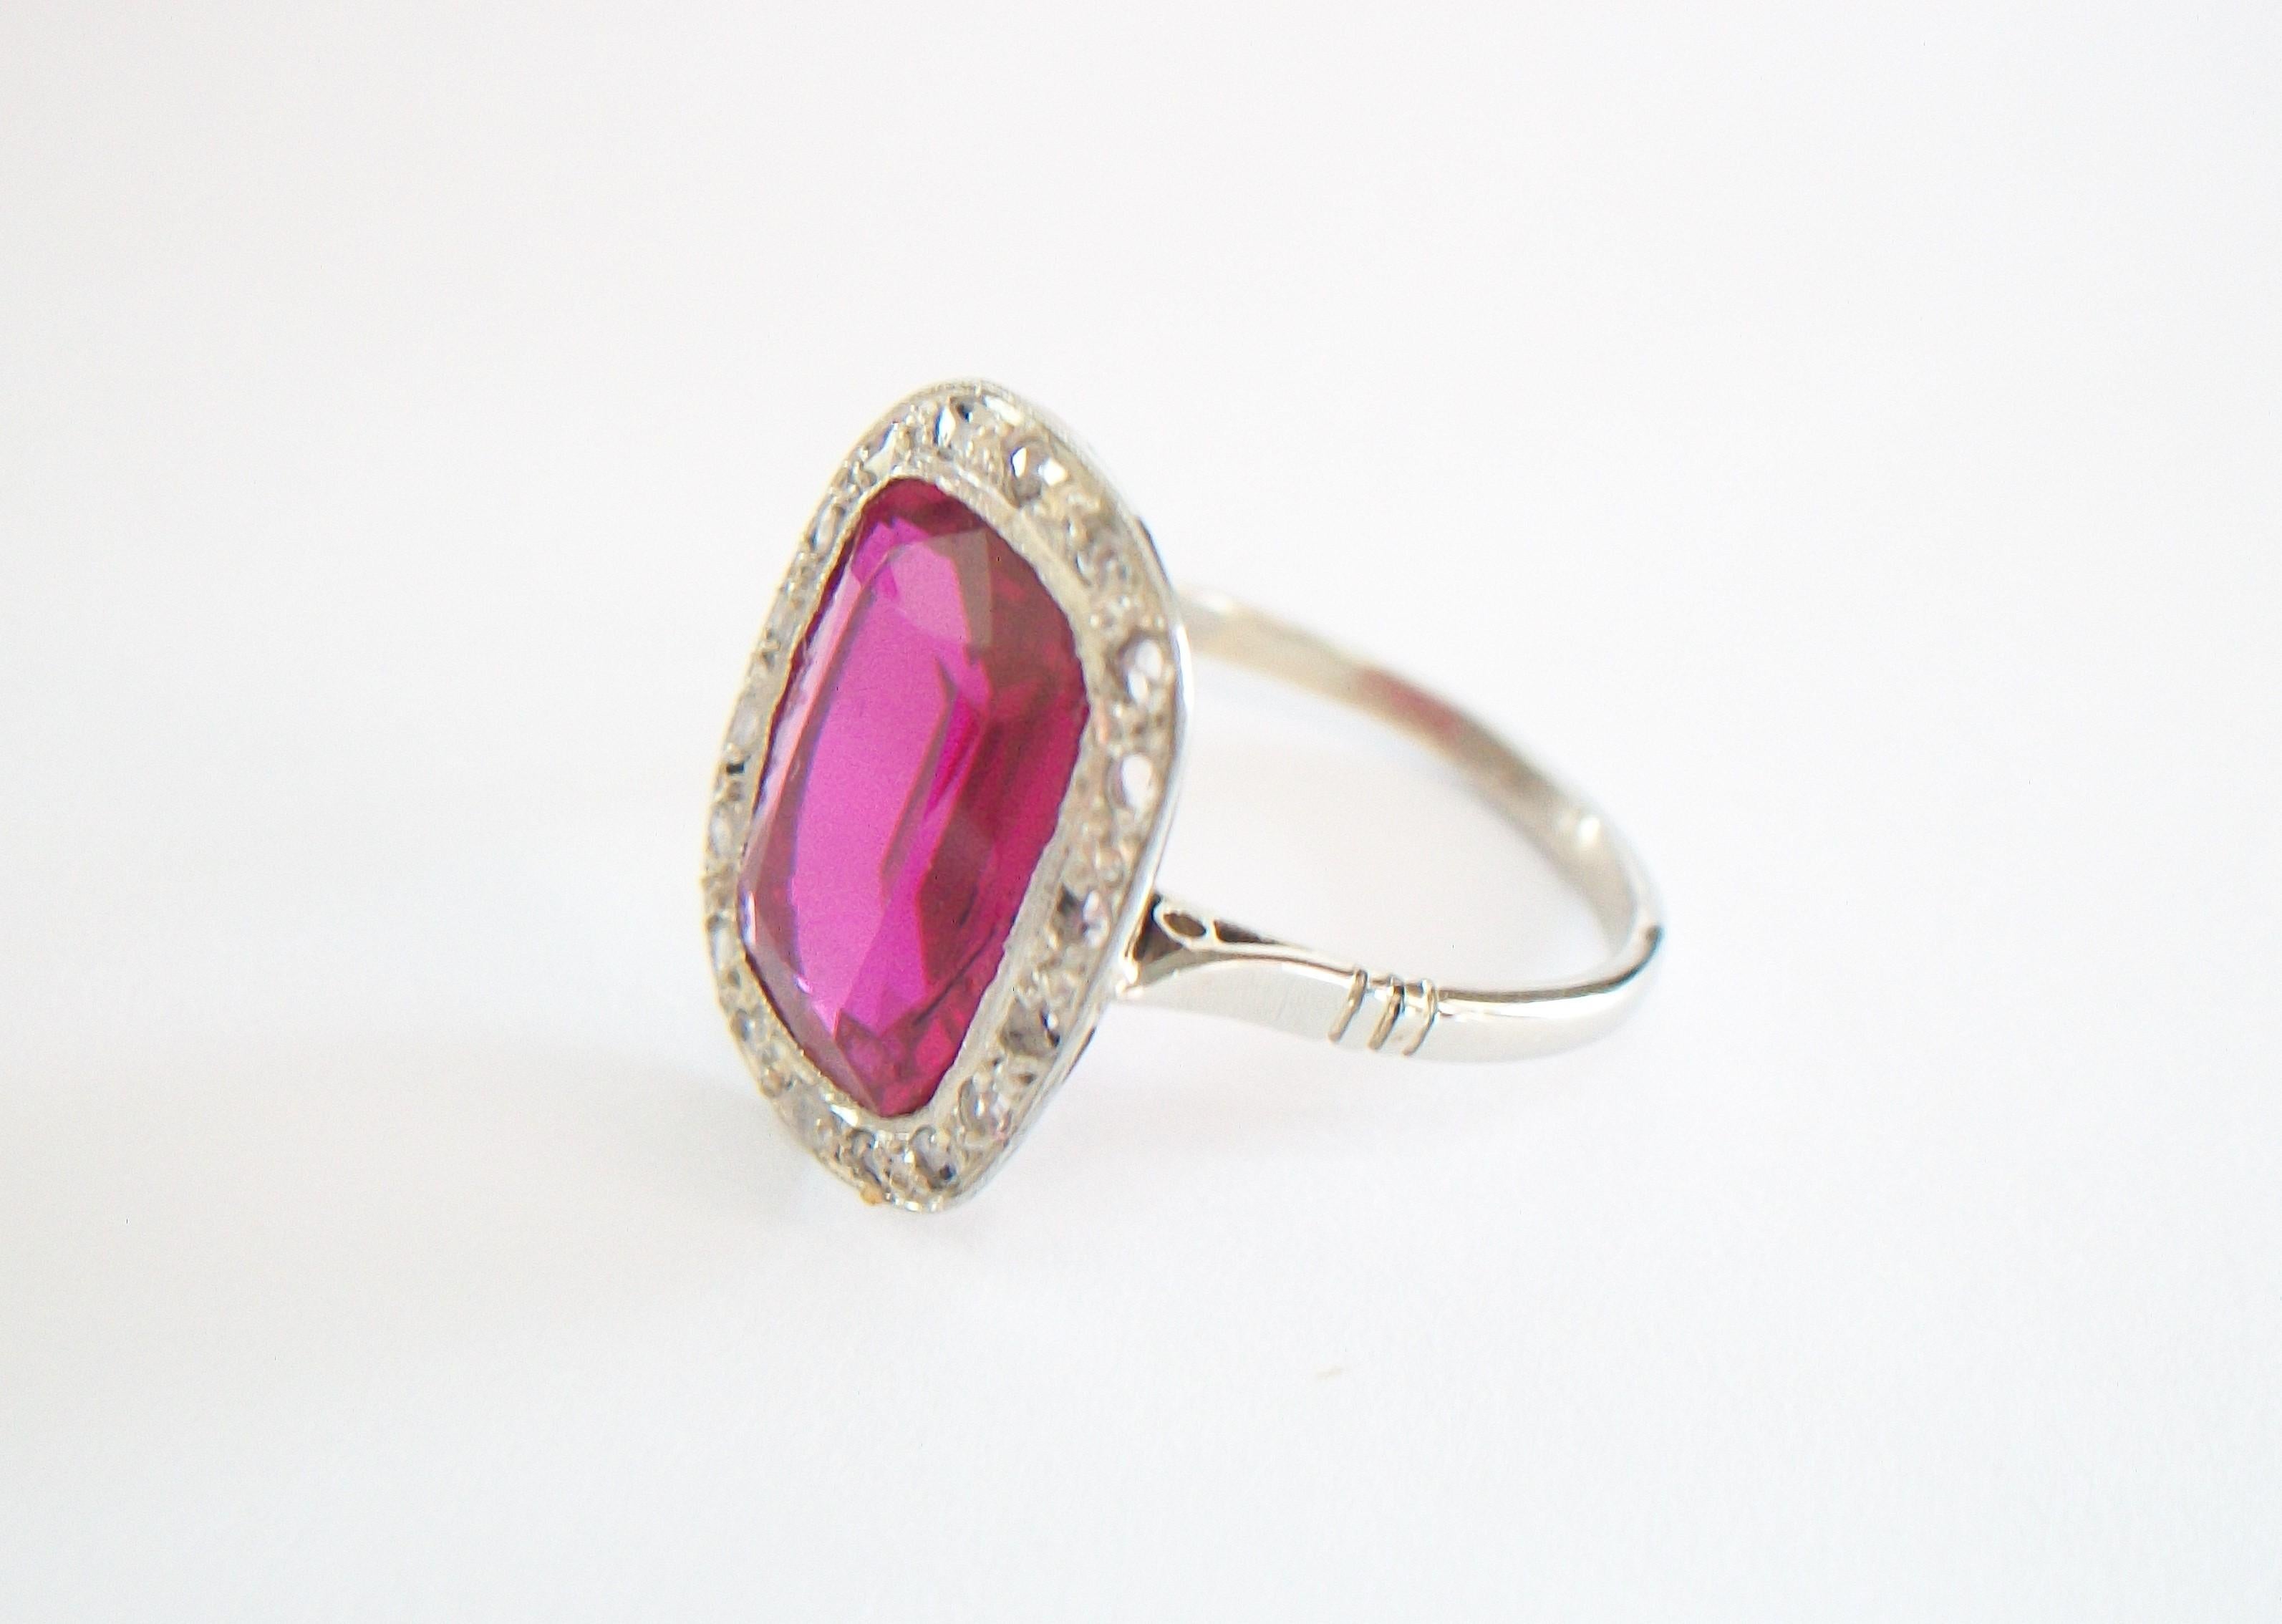 French Art Deco Synthetic Ruby & Diamond Halo Ring, 18K Gold, Circa 1920's In Excellent Condition For Sale In Chatham, CA